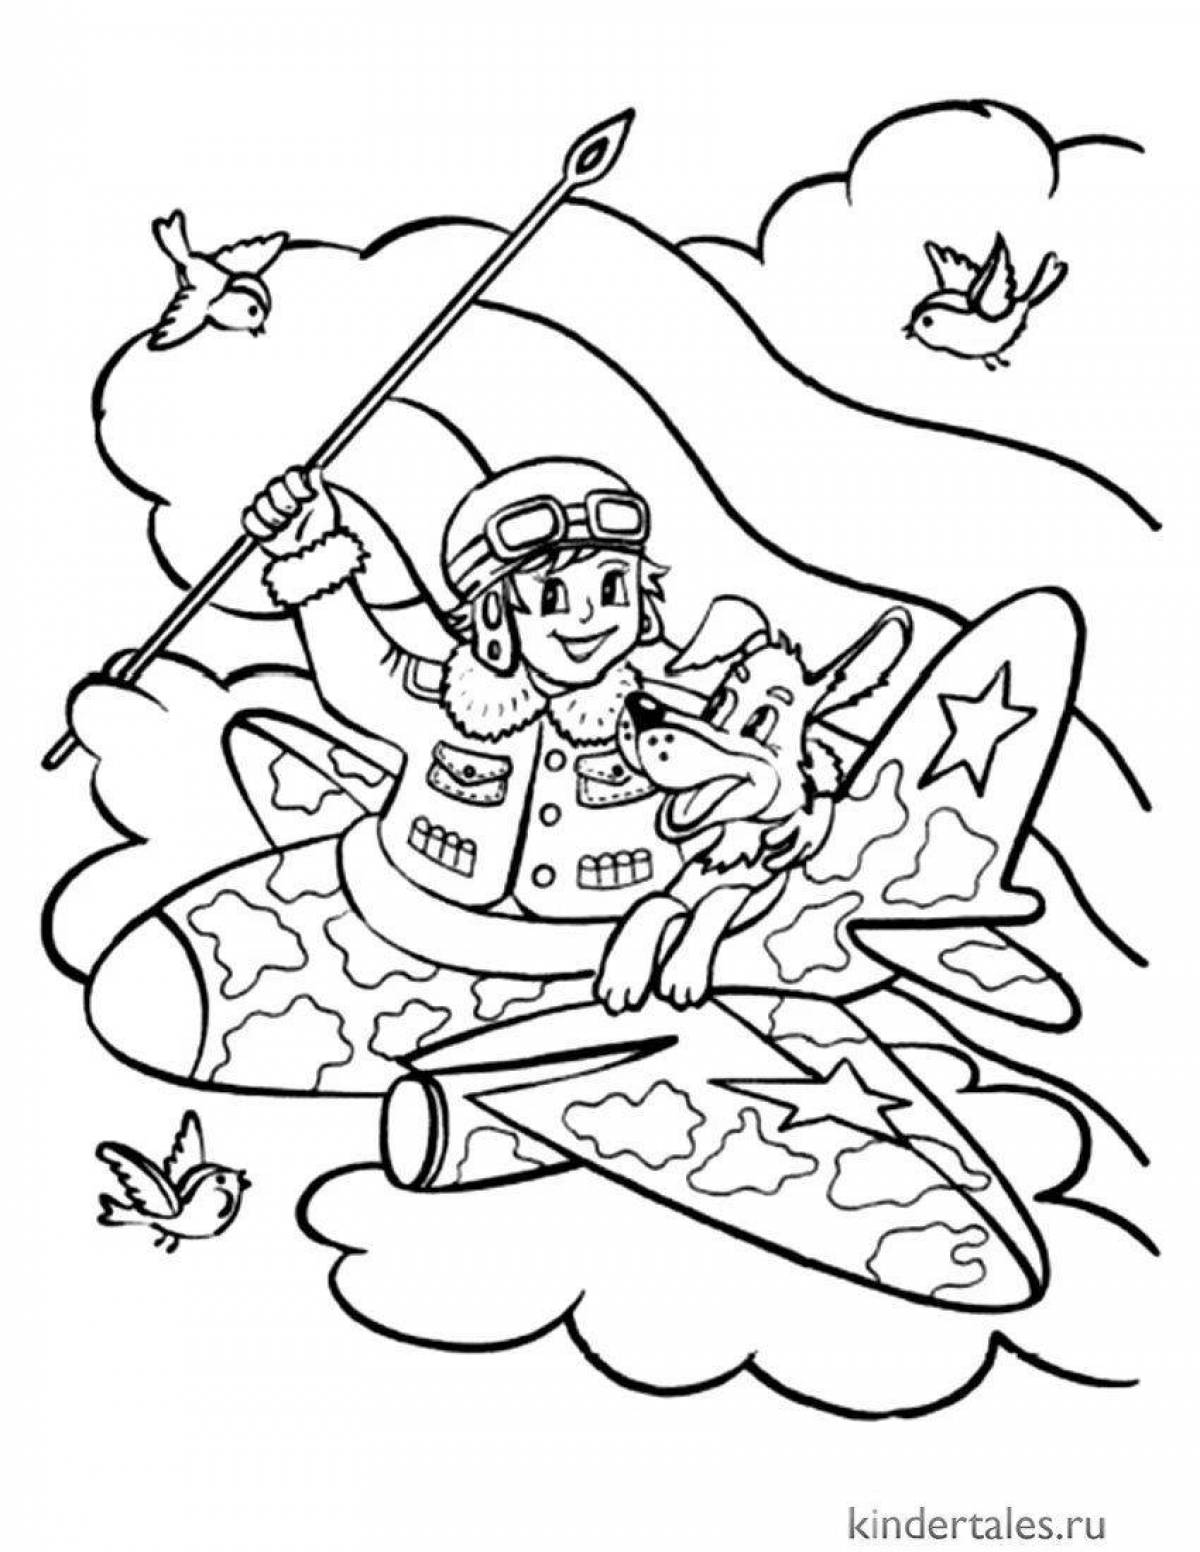 On a military theme for children to school #4